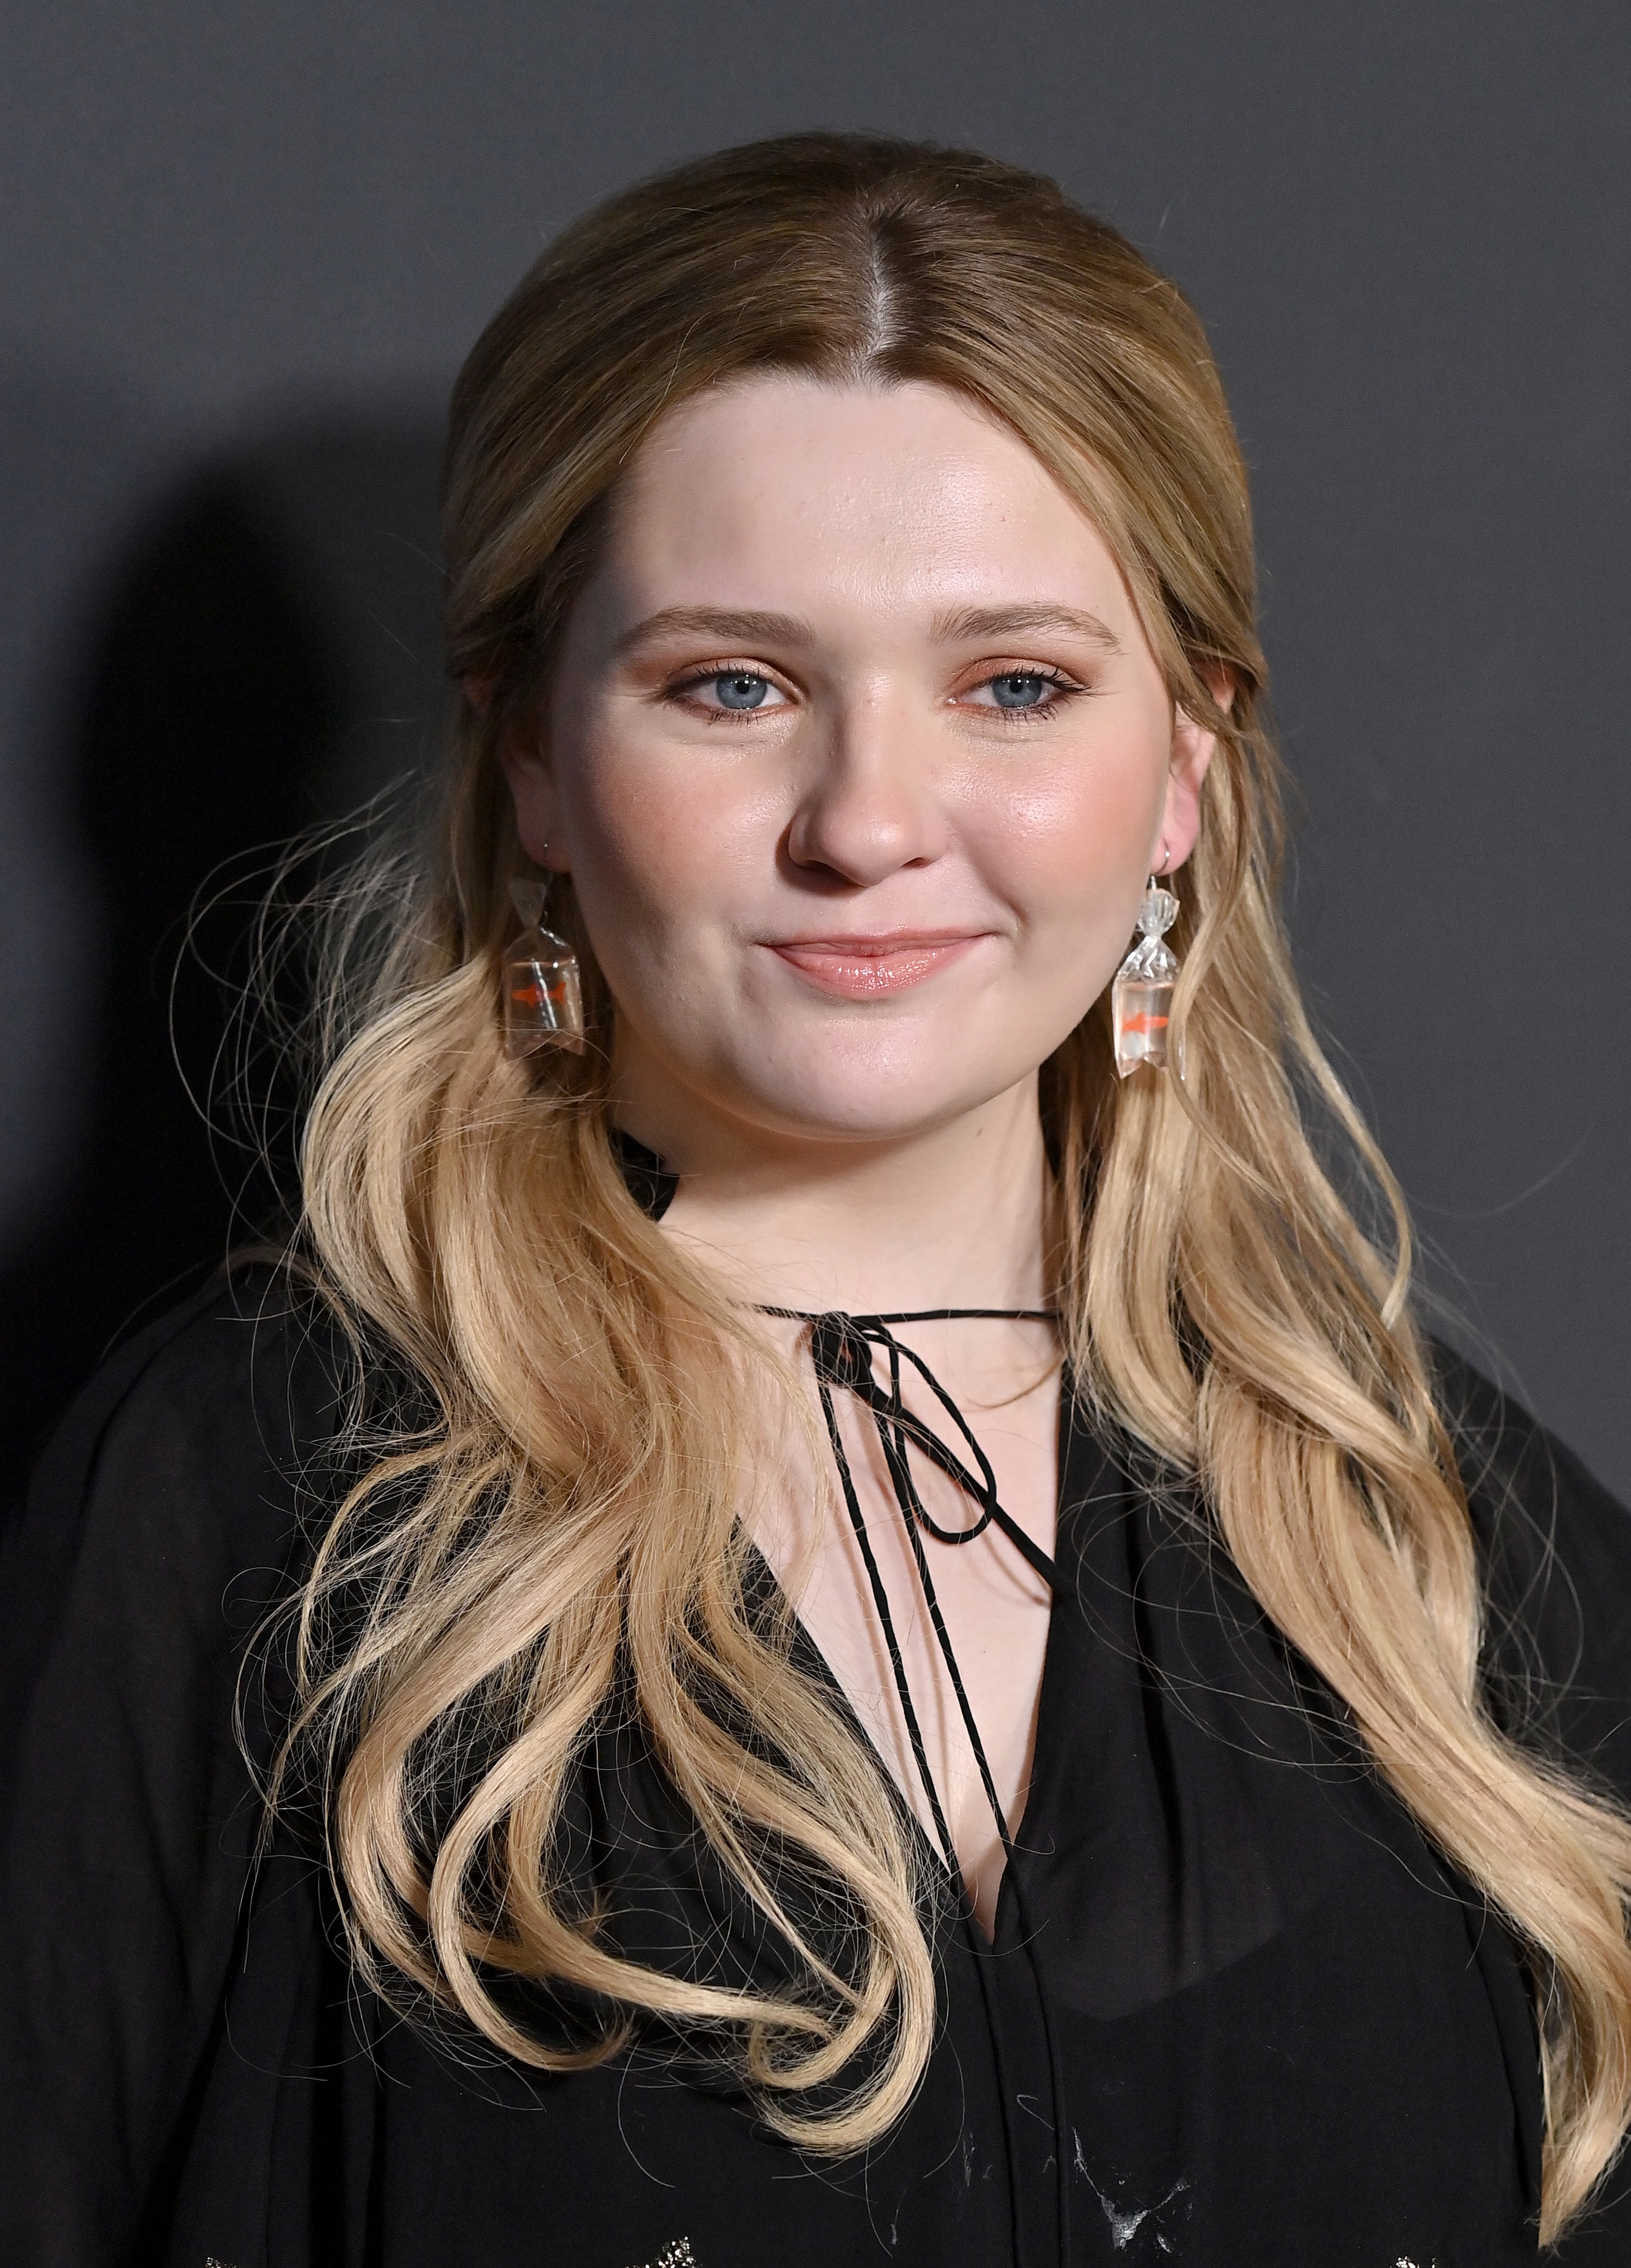 Abigail Breslin Adult Videos - Abigail Breslin Was In An Abusive Relationship